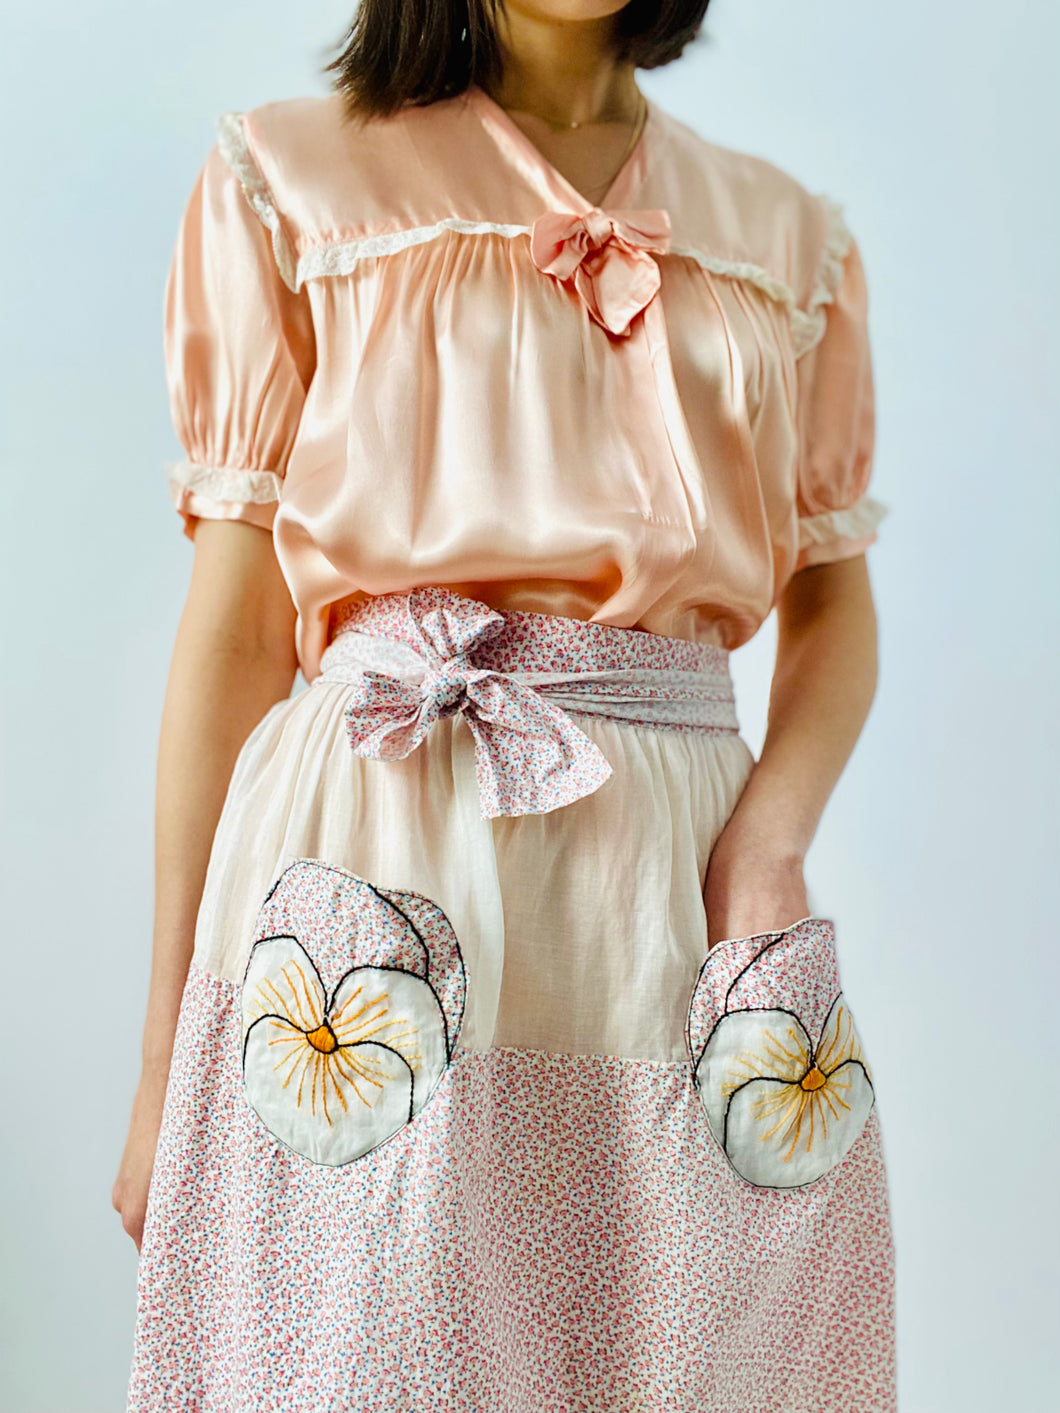 Vintage 1930s floral embroidered apron with pockets